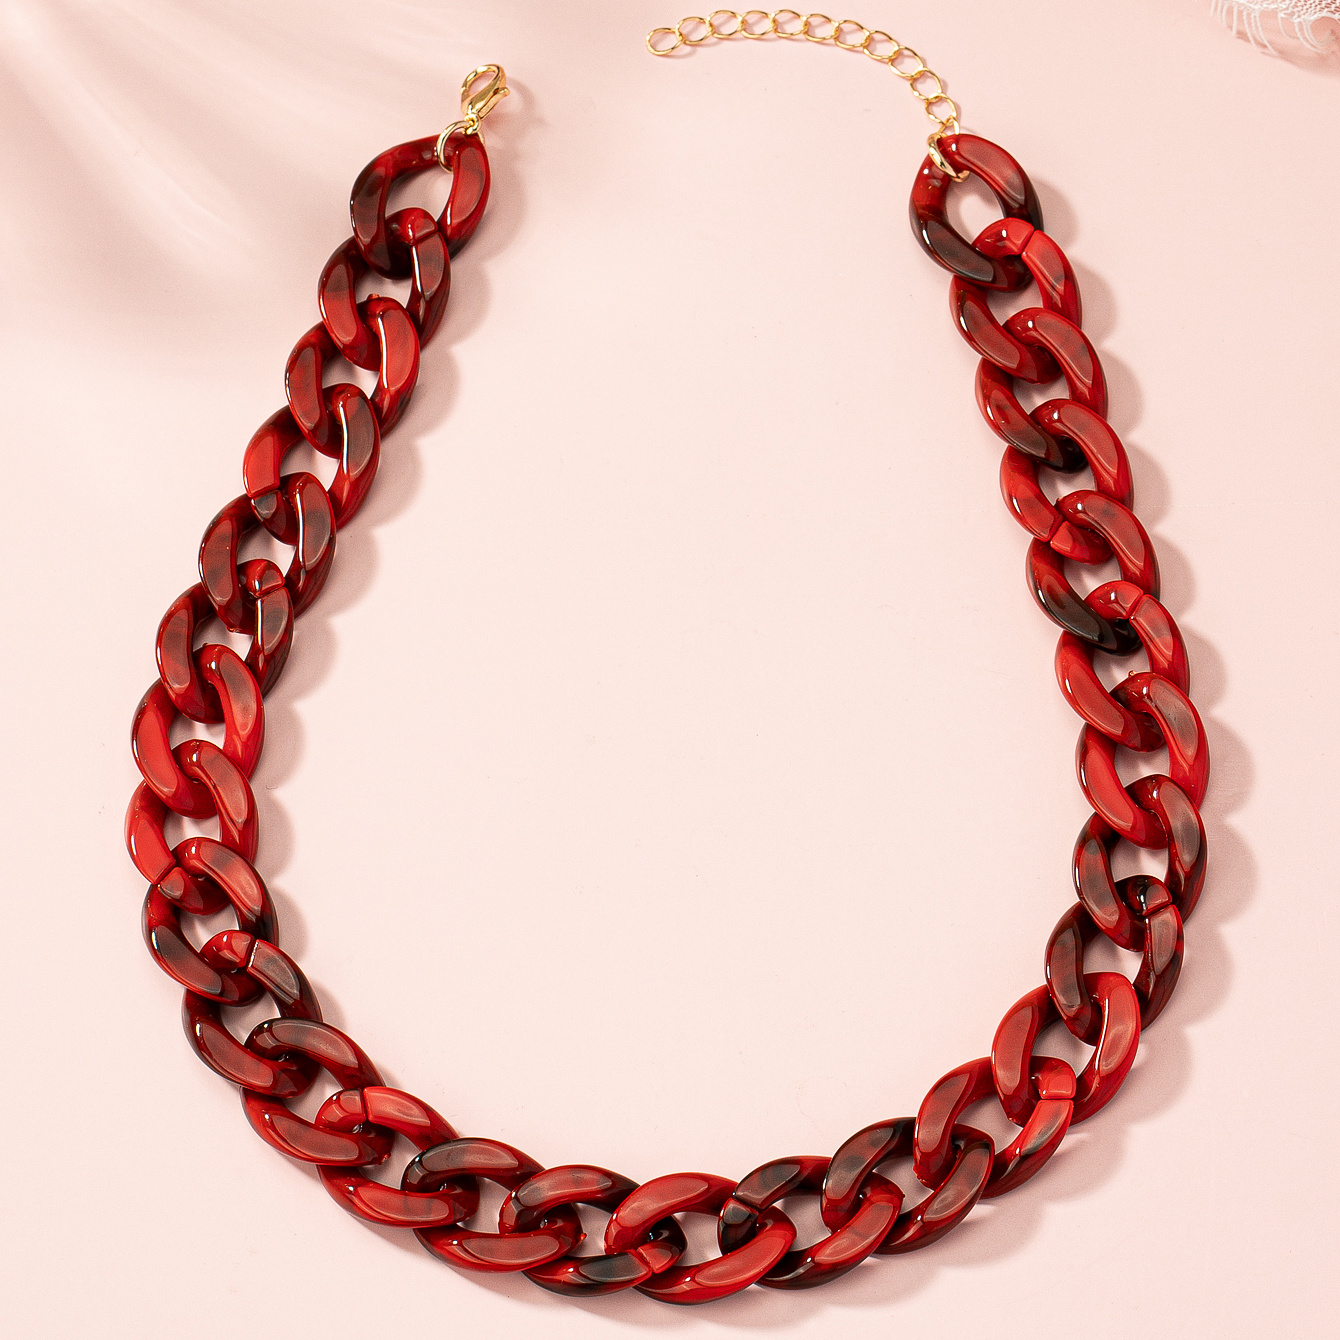 Chunky Chain Link Chain Necklace Statement Jewelry Chain 